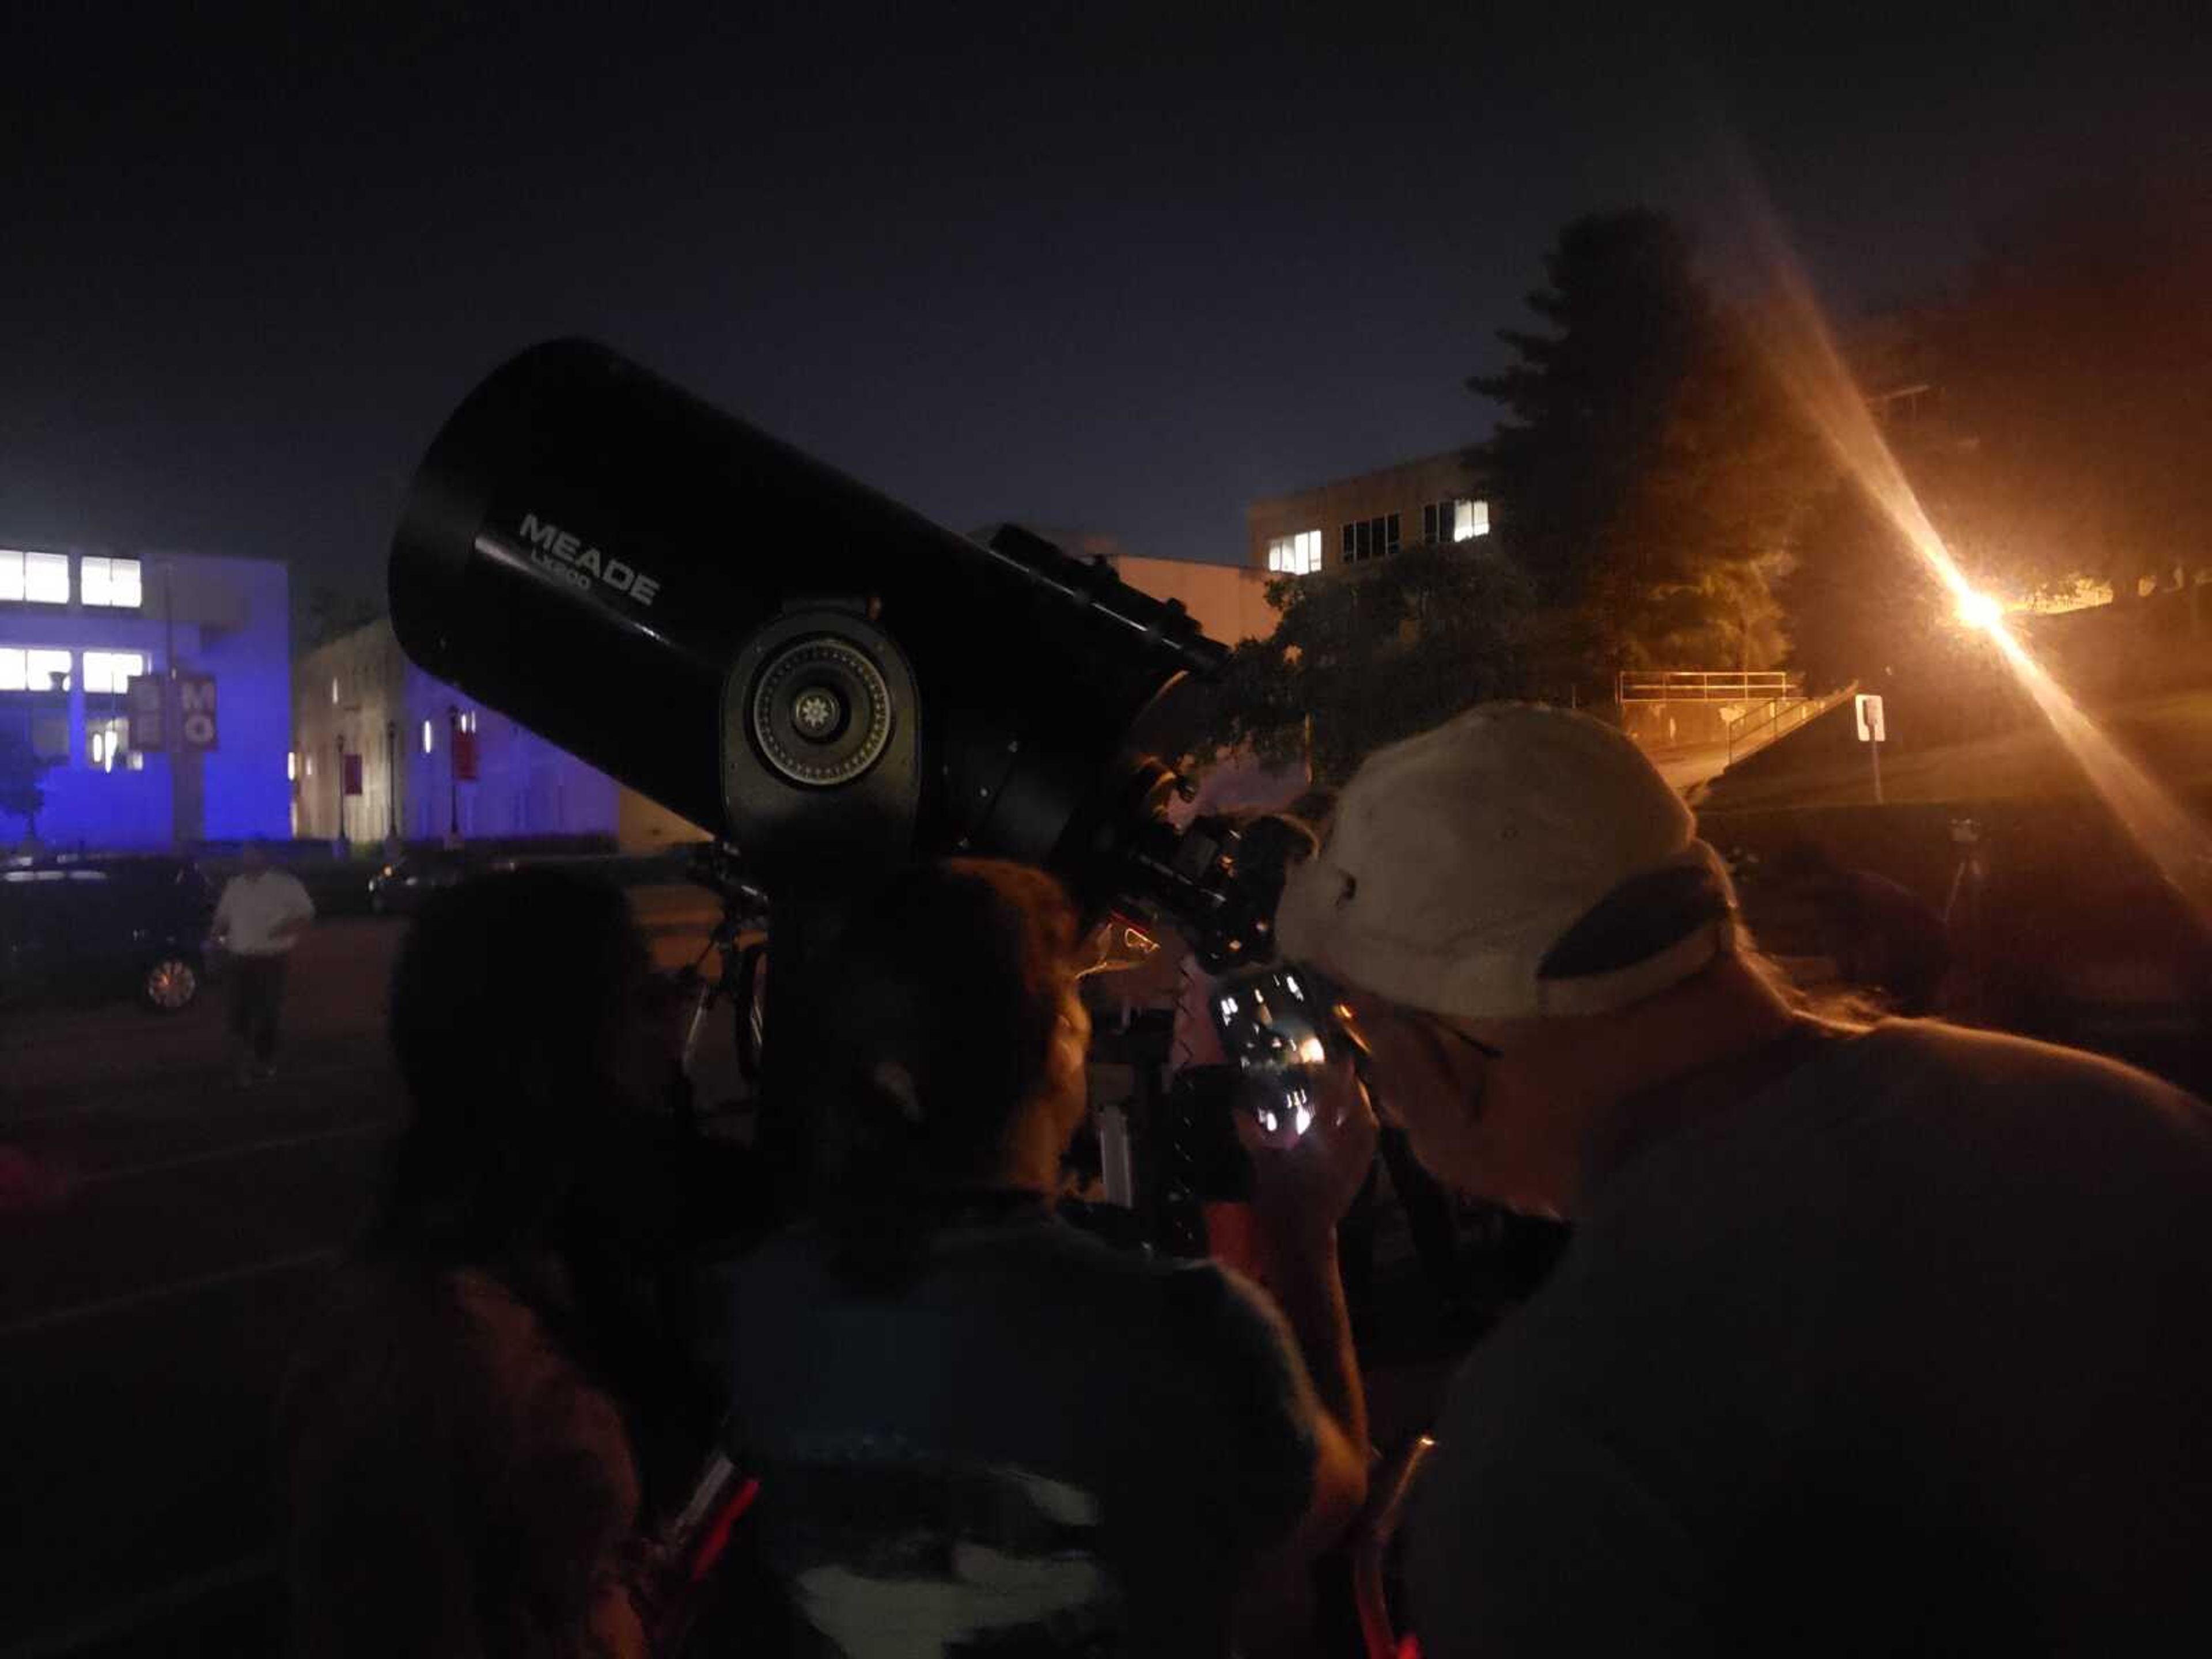 This 14-inch reflector telescope took an hour to calibrate. In it, students could see Saturn and its ring, typically invisible to the naked eye.